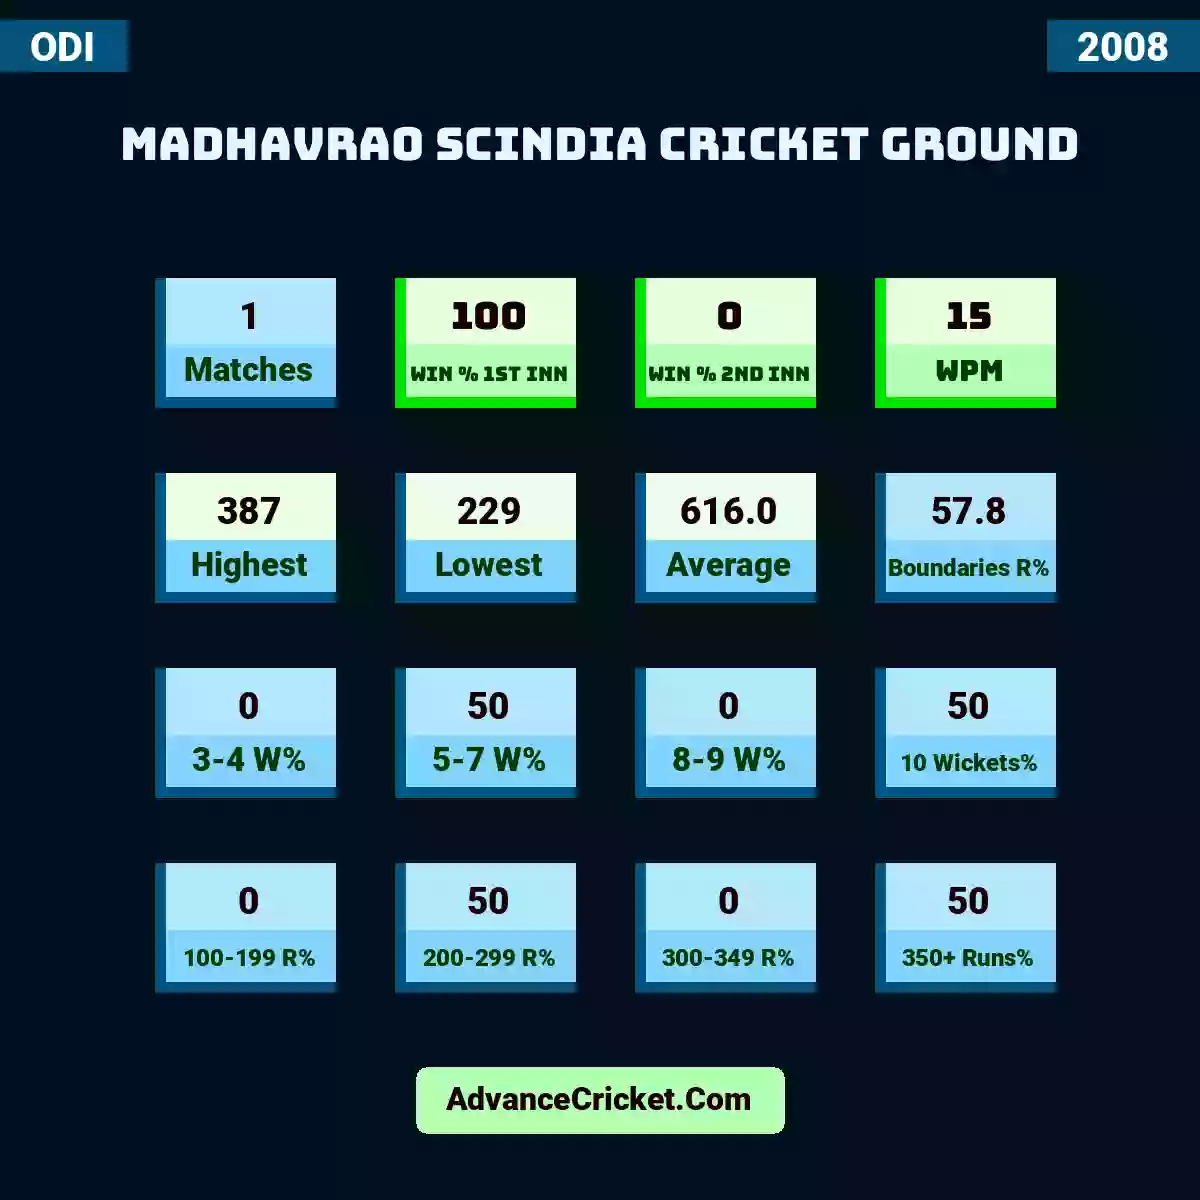 Image showing Madhavrao Scindia Cricket Ground with Matches: 1, Win % 1st Inn: 100, Win % 2nd Inn: 0, WPM: 15, Highest: 387, Lowest: 229, Average: 616.0, Boundaries R%: 57.8, 3-4 W%: 0, 5-7 W%: 50, 8-9 W%: 0, 10 Wickets%: 50, 100-199 R%: 0, 200-299 R%: 50, 300-349 R%: 0, 350+ Runs%: 50.